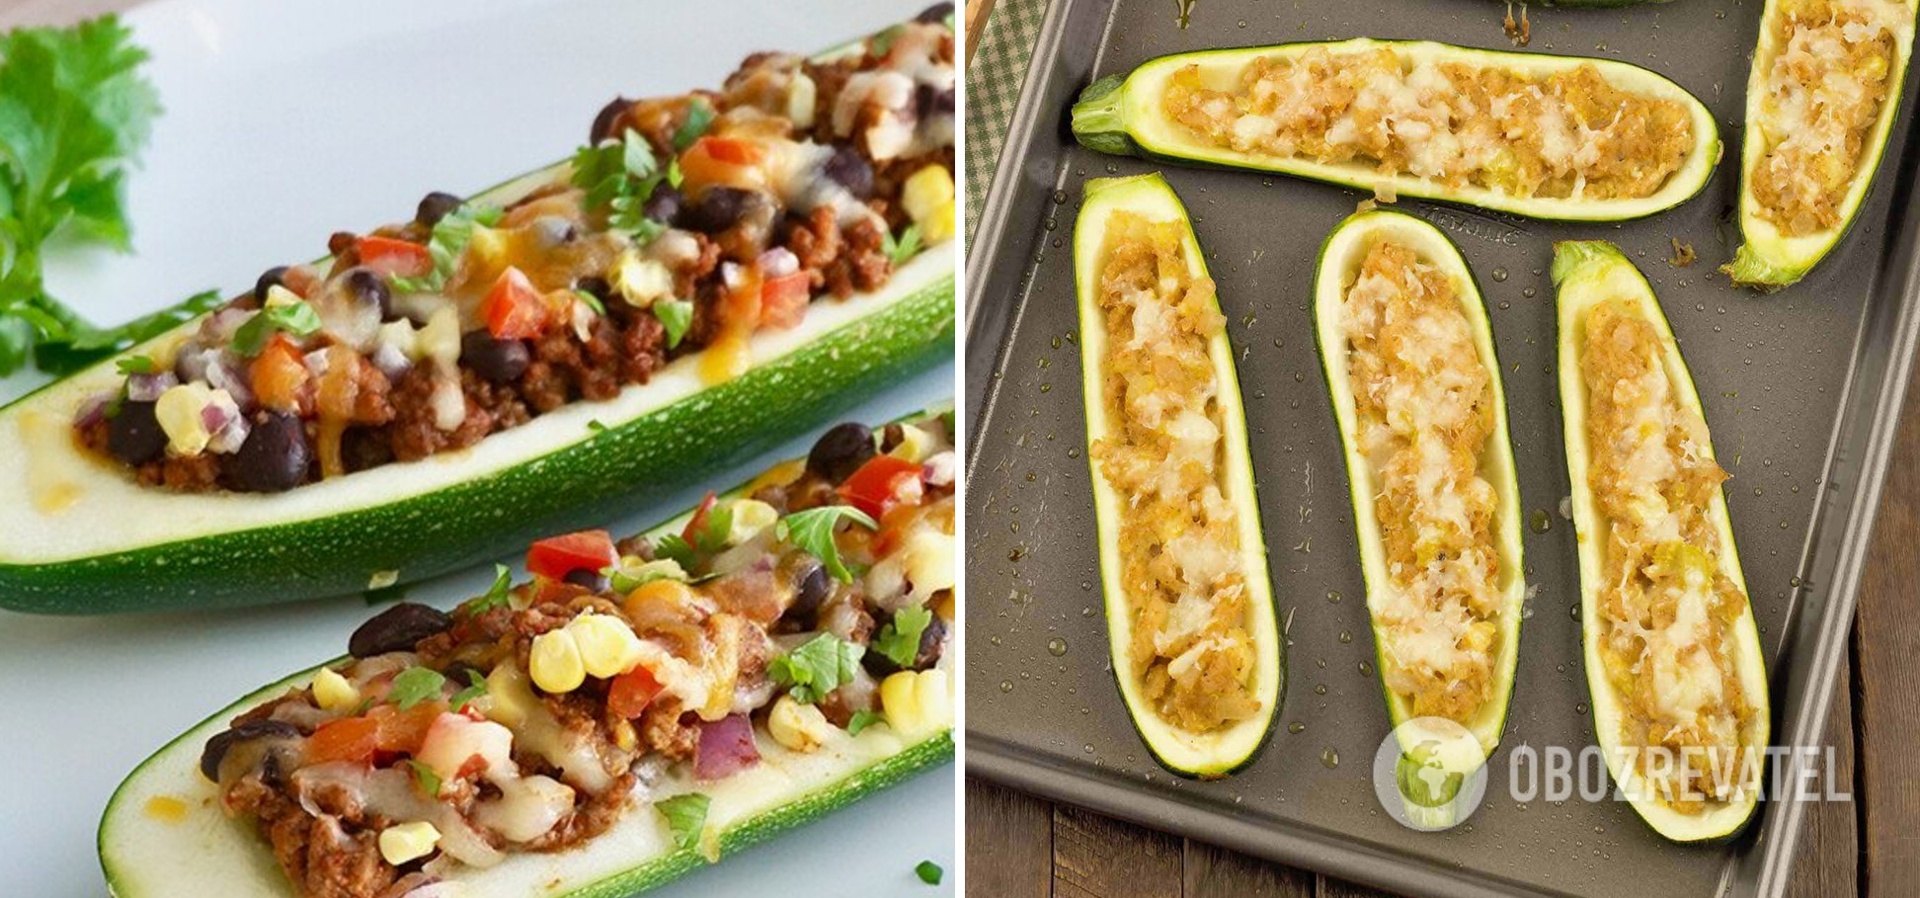 Zucchini boats in the oven